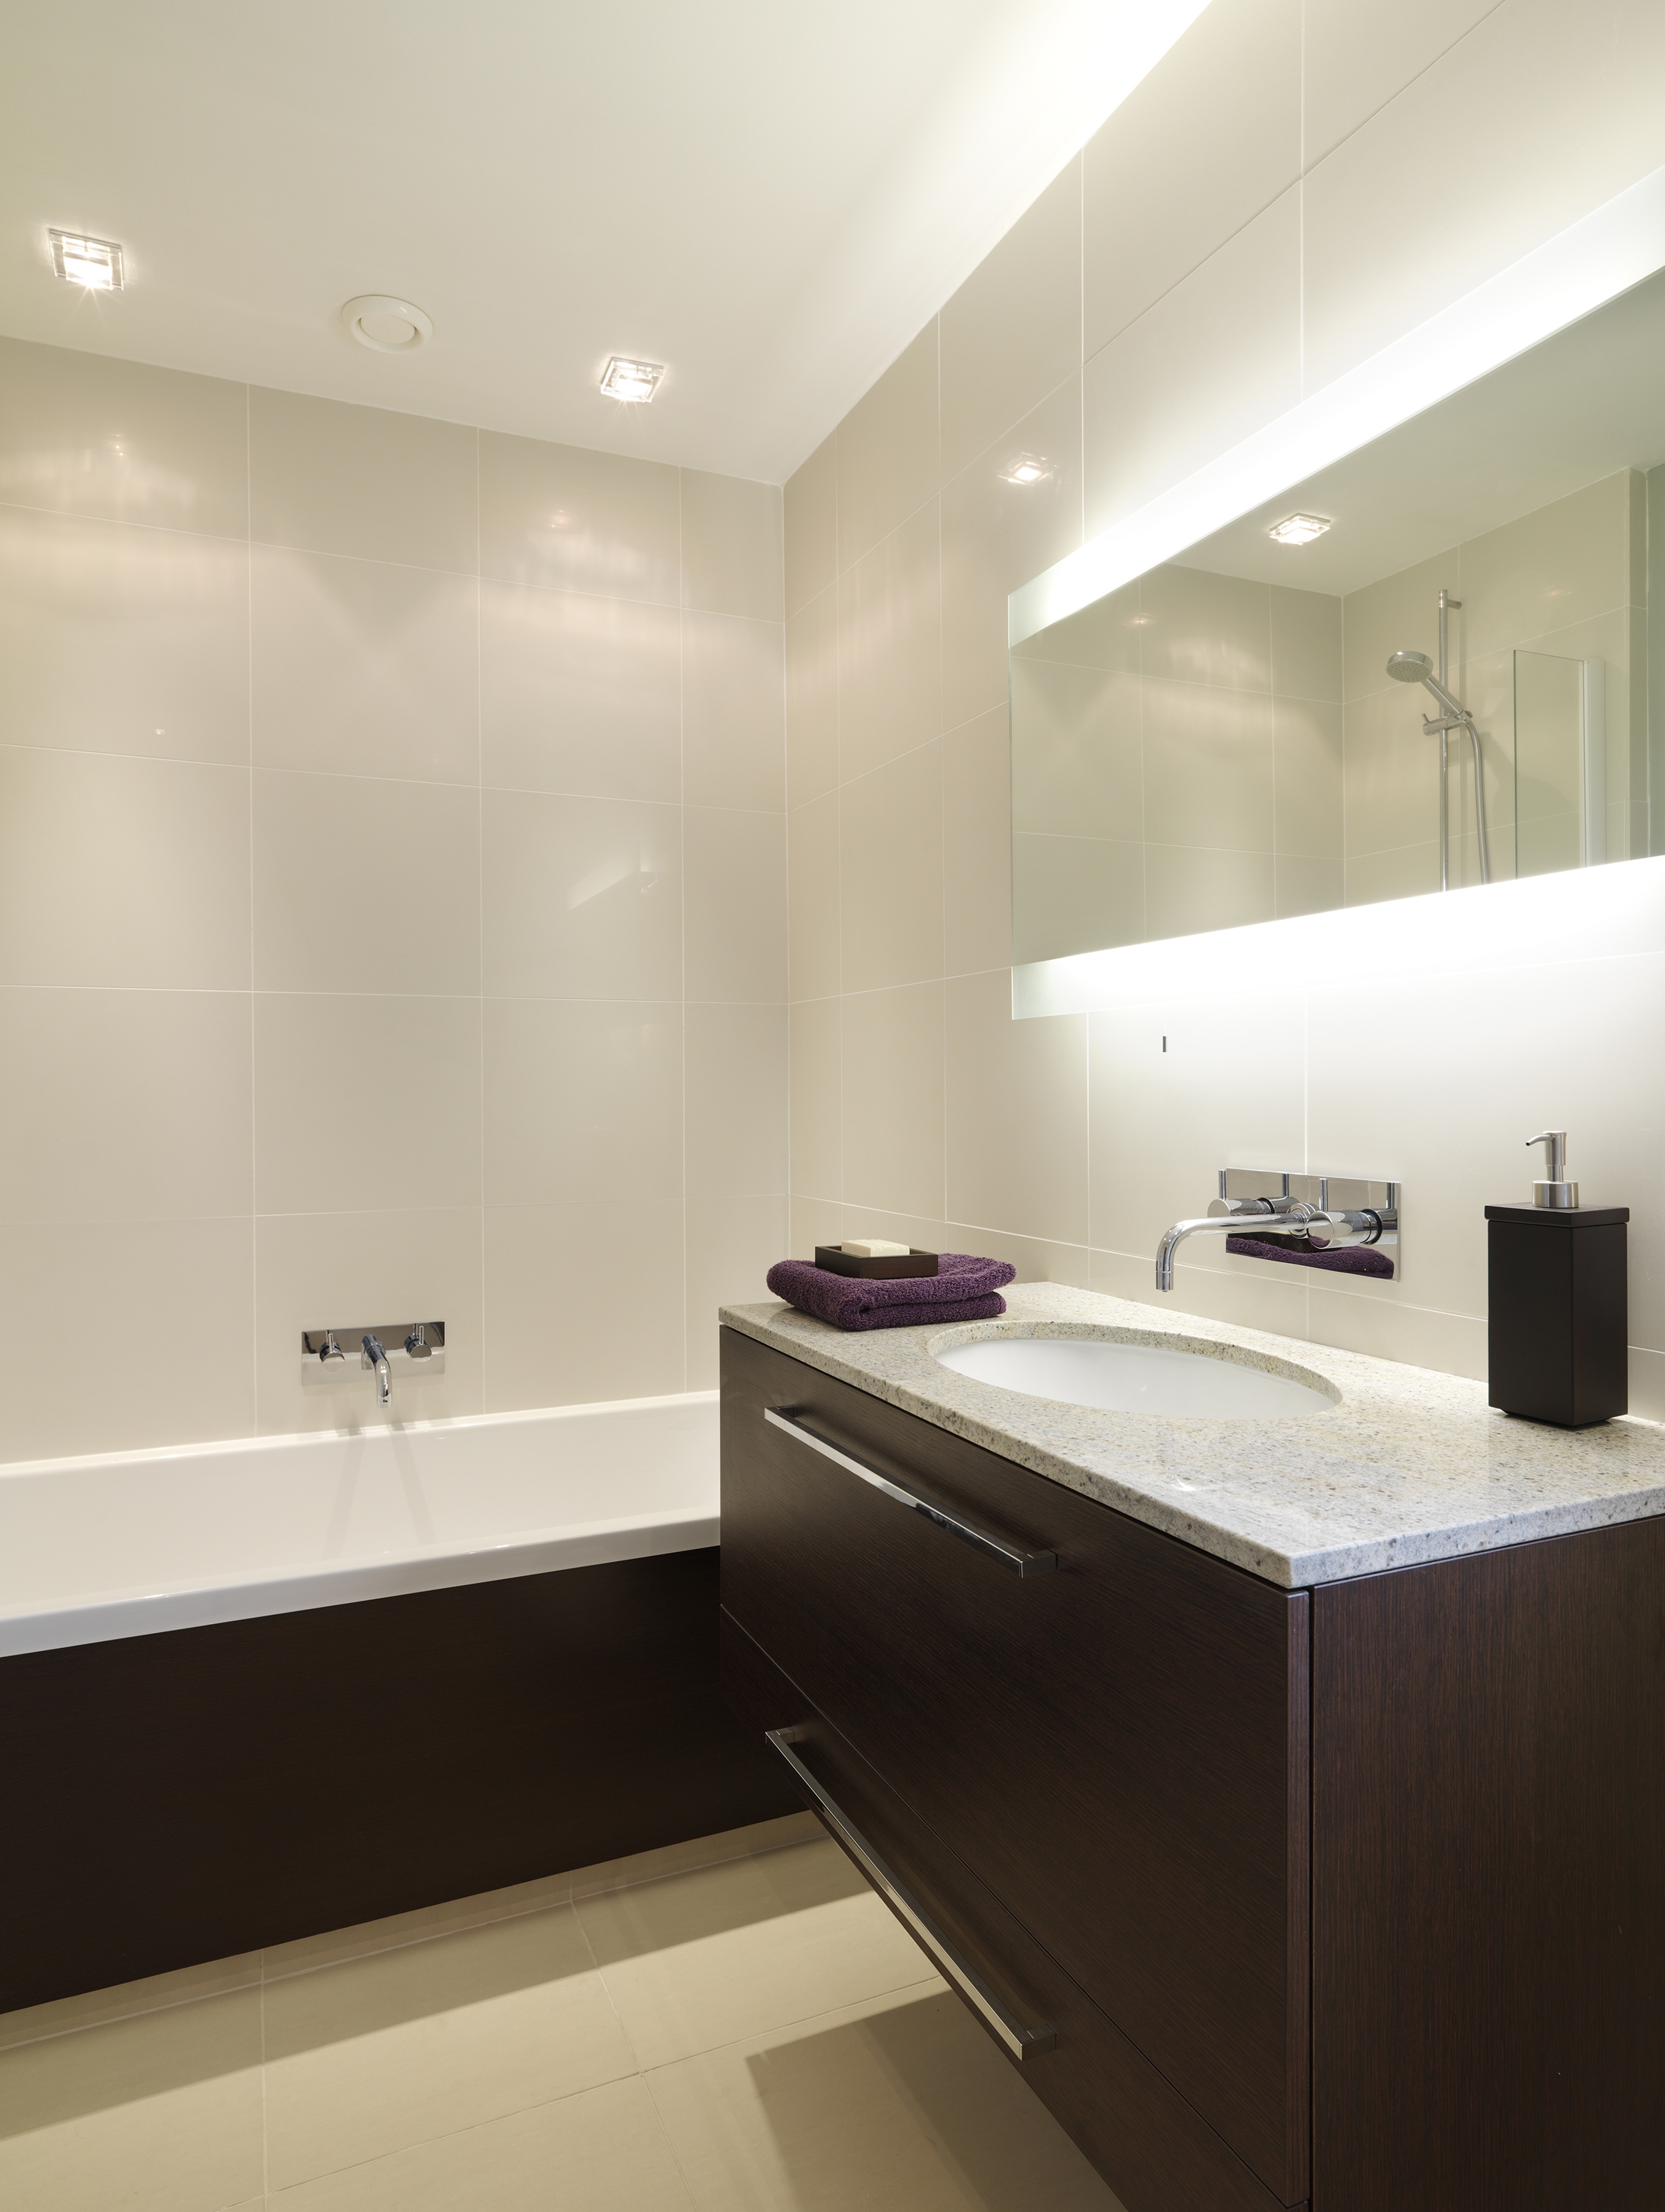 Led Recessed Ceiling Lights For Bathroom